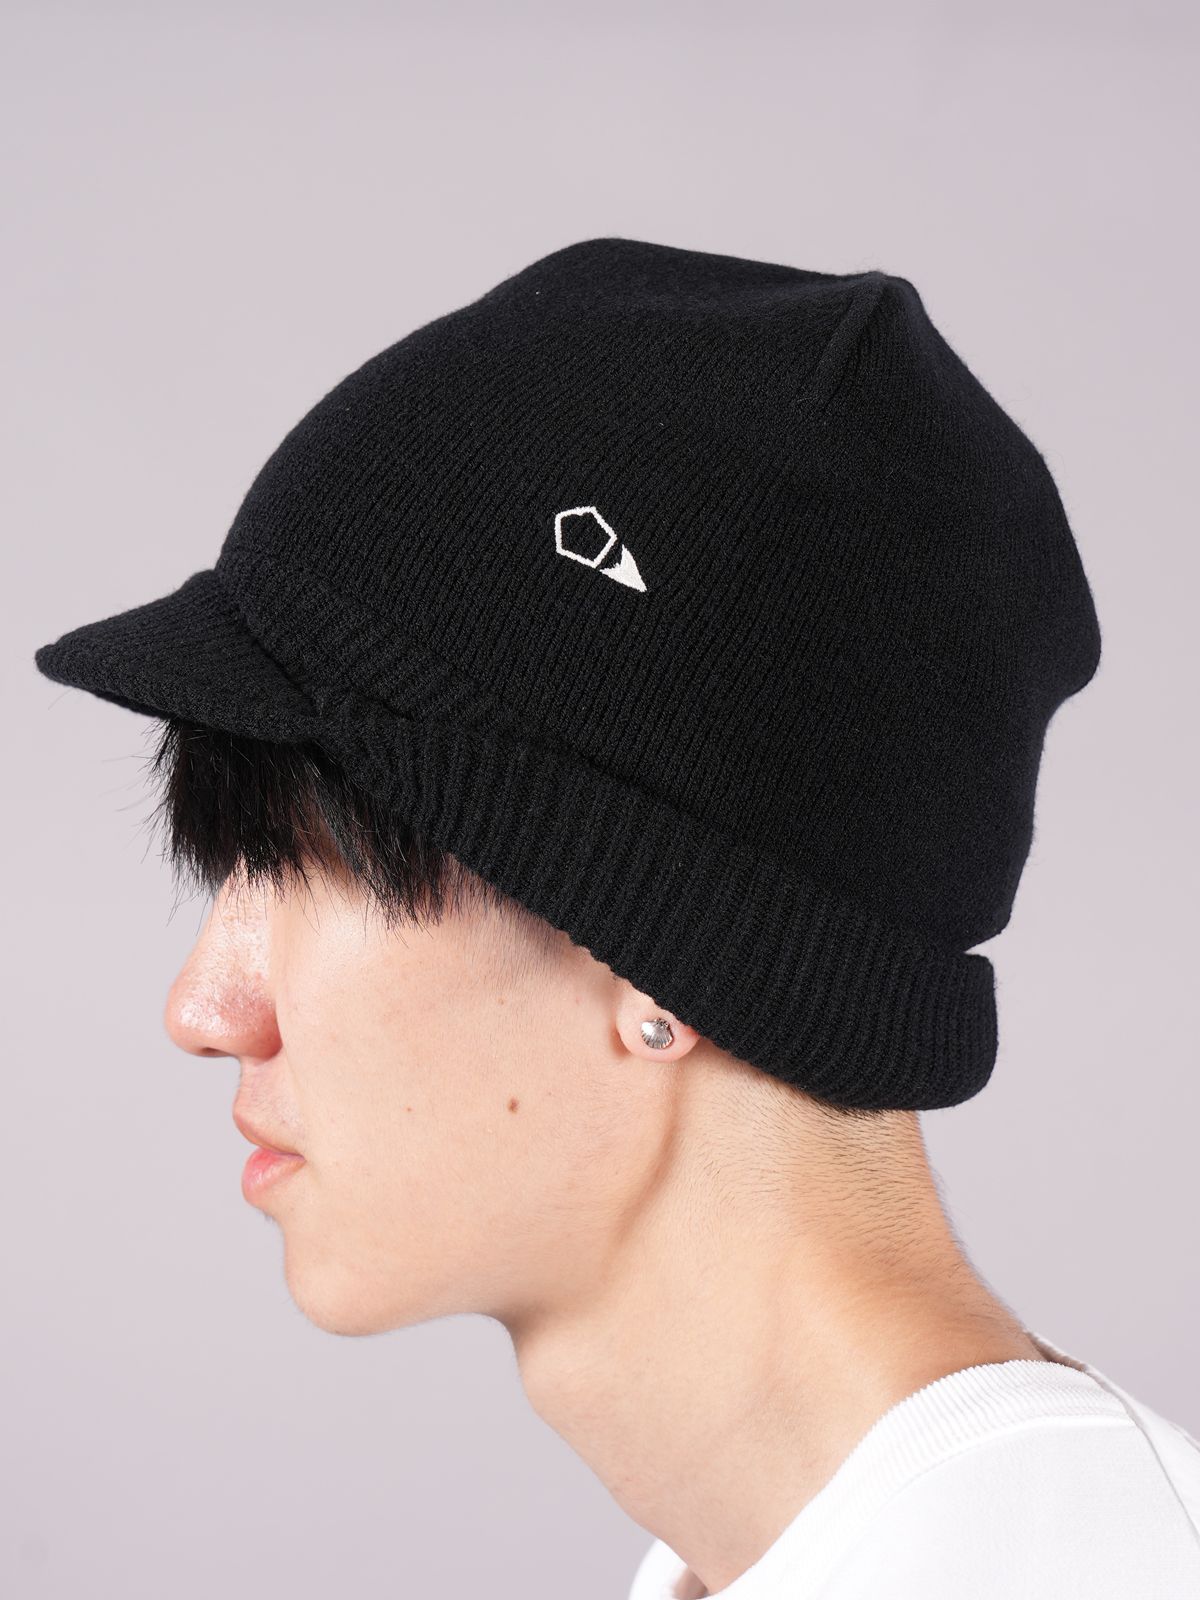 STONE ISLAND SHADOW PROJECT - N022V SHAPED BEANIE_CHAPTER 2